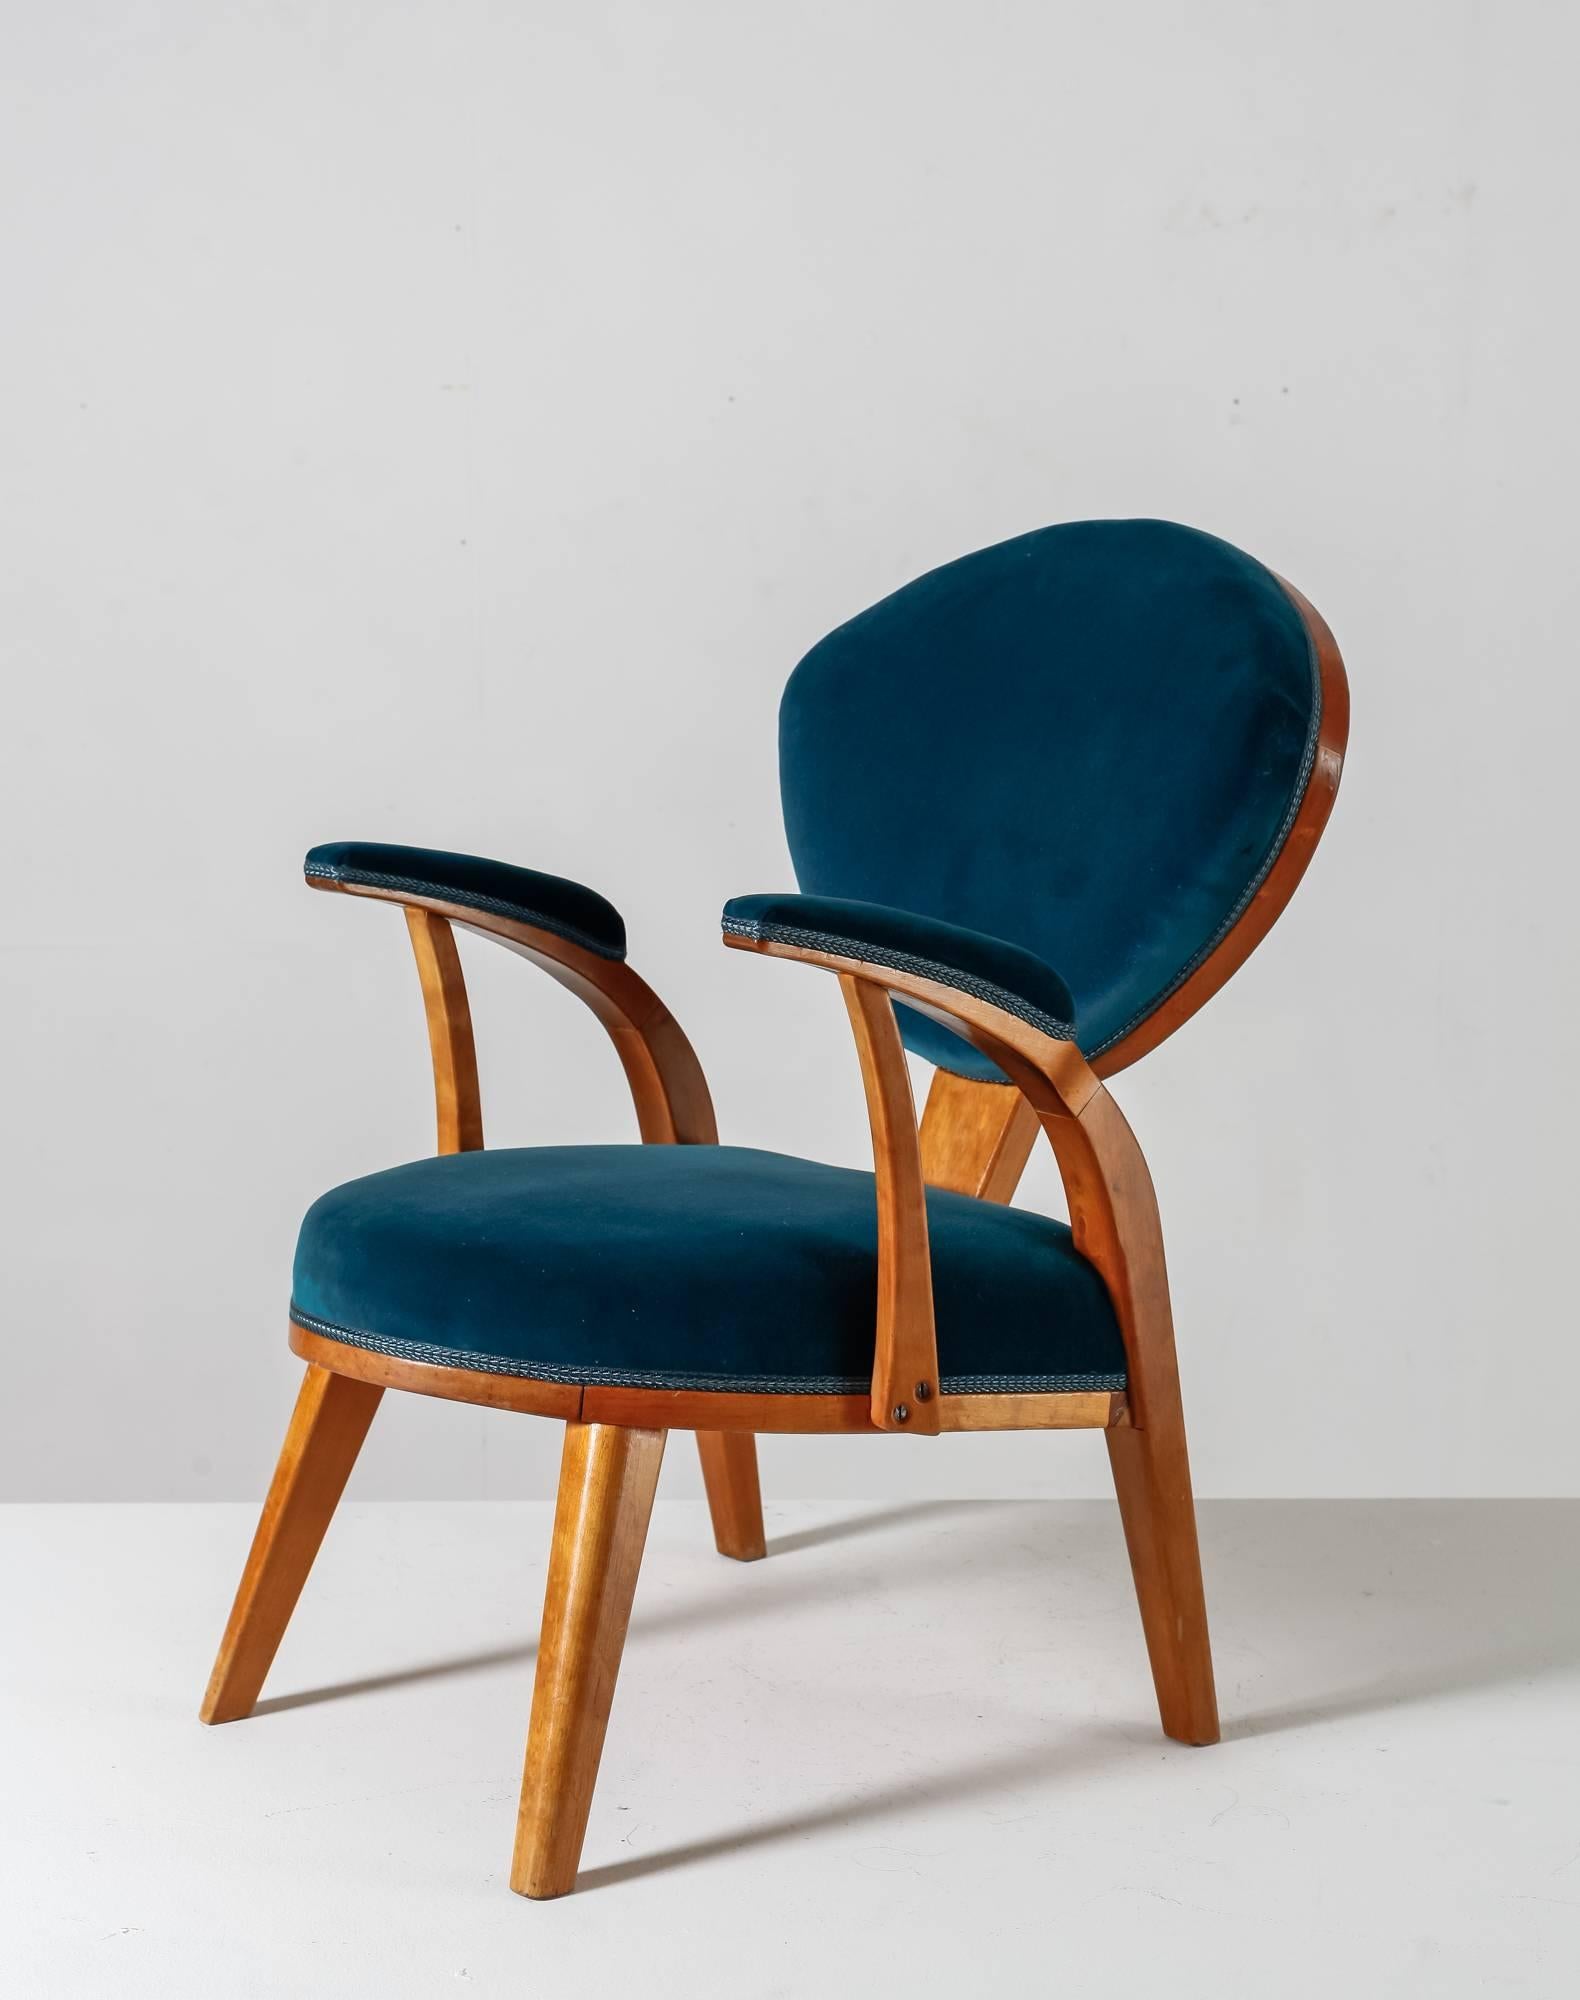 An armchair from Sweden, made of a beech frame and upholstered with a jade green velvet upholstery.
The seating tilts back slightly and the armrests have a lovely curve and a velvet upholstery on top. Beautiful wood construction on the back.